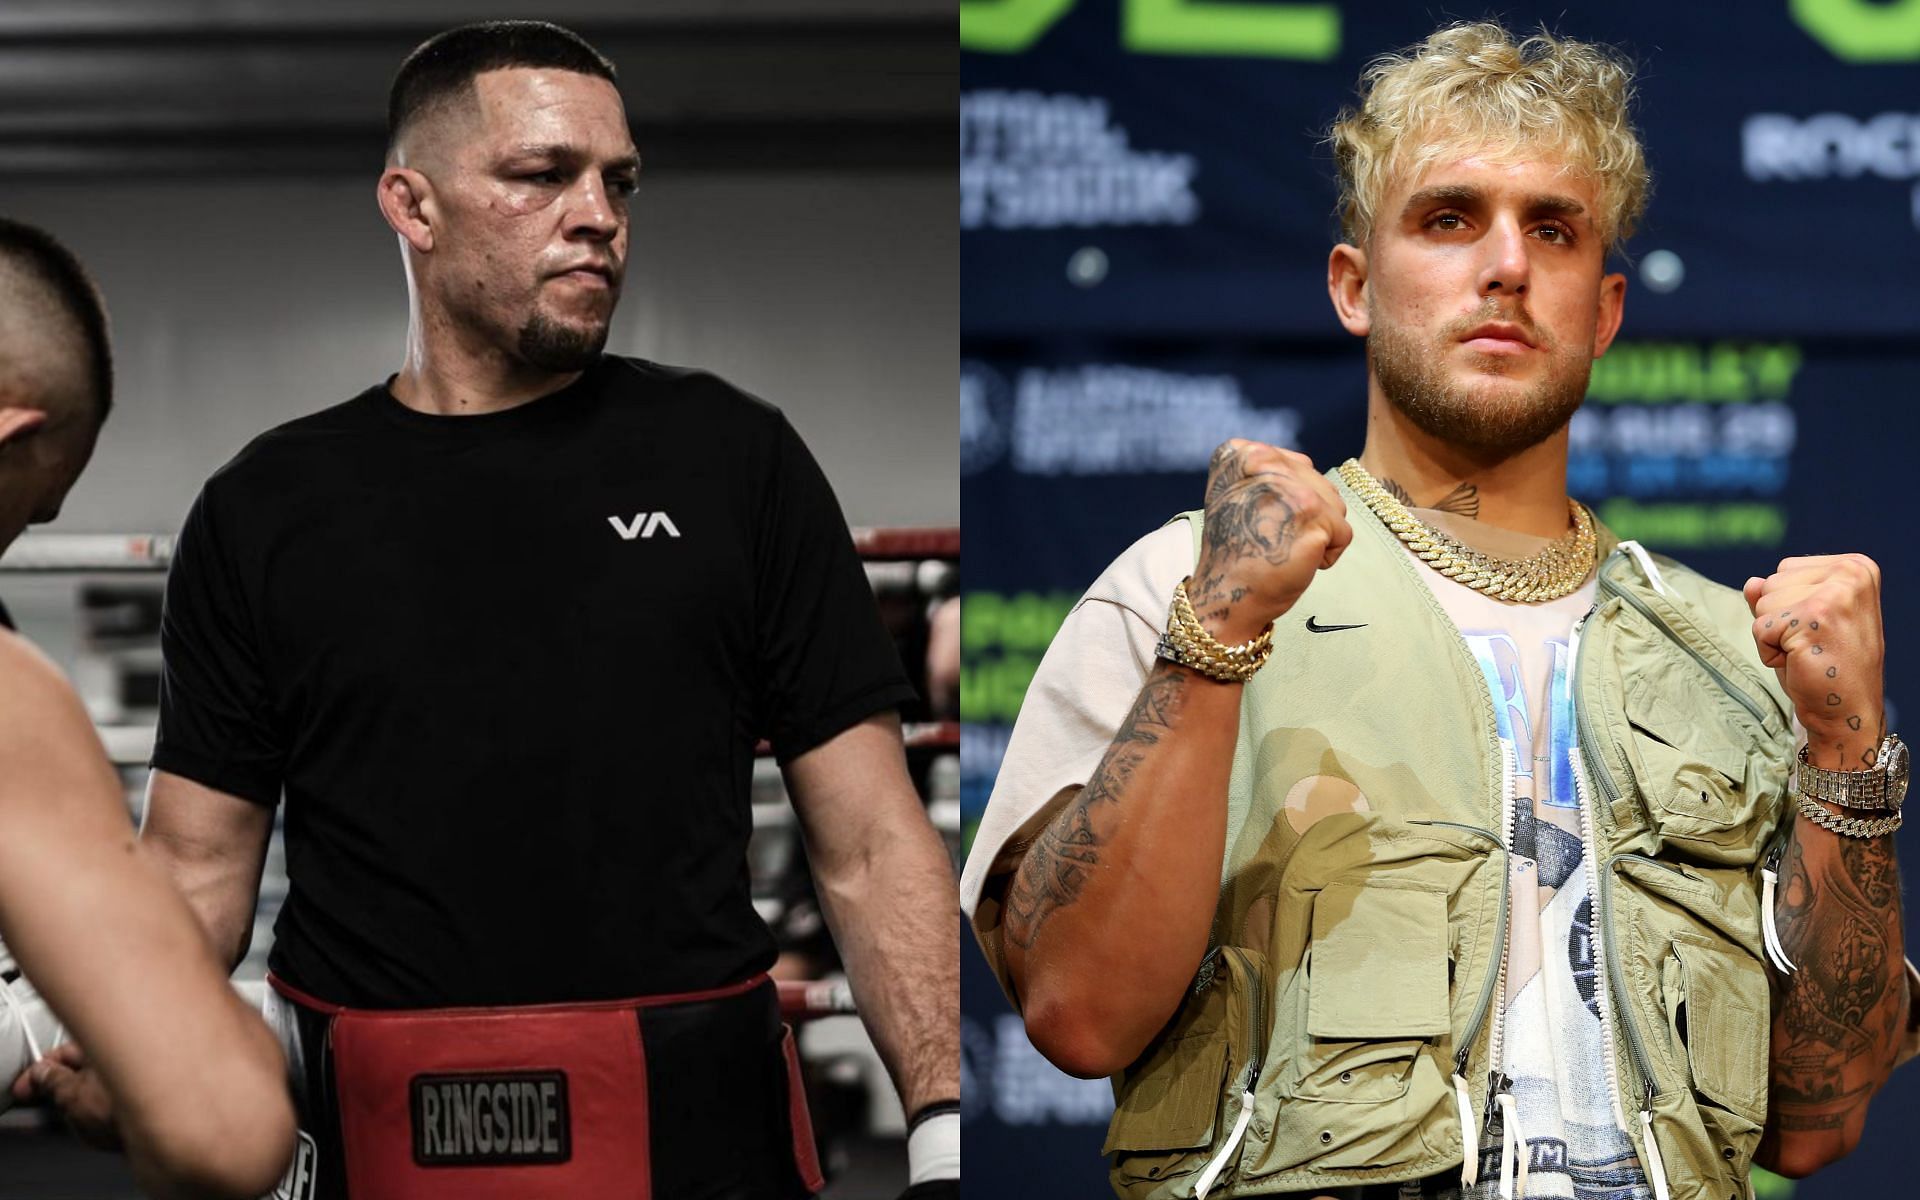 Nate Diaz and Jake Paul [Image credits: Getty Images and @natediaz209 on Instagram]